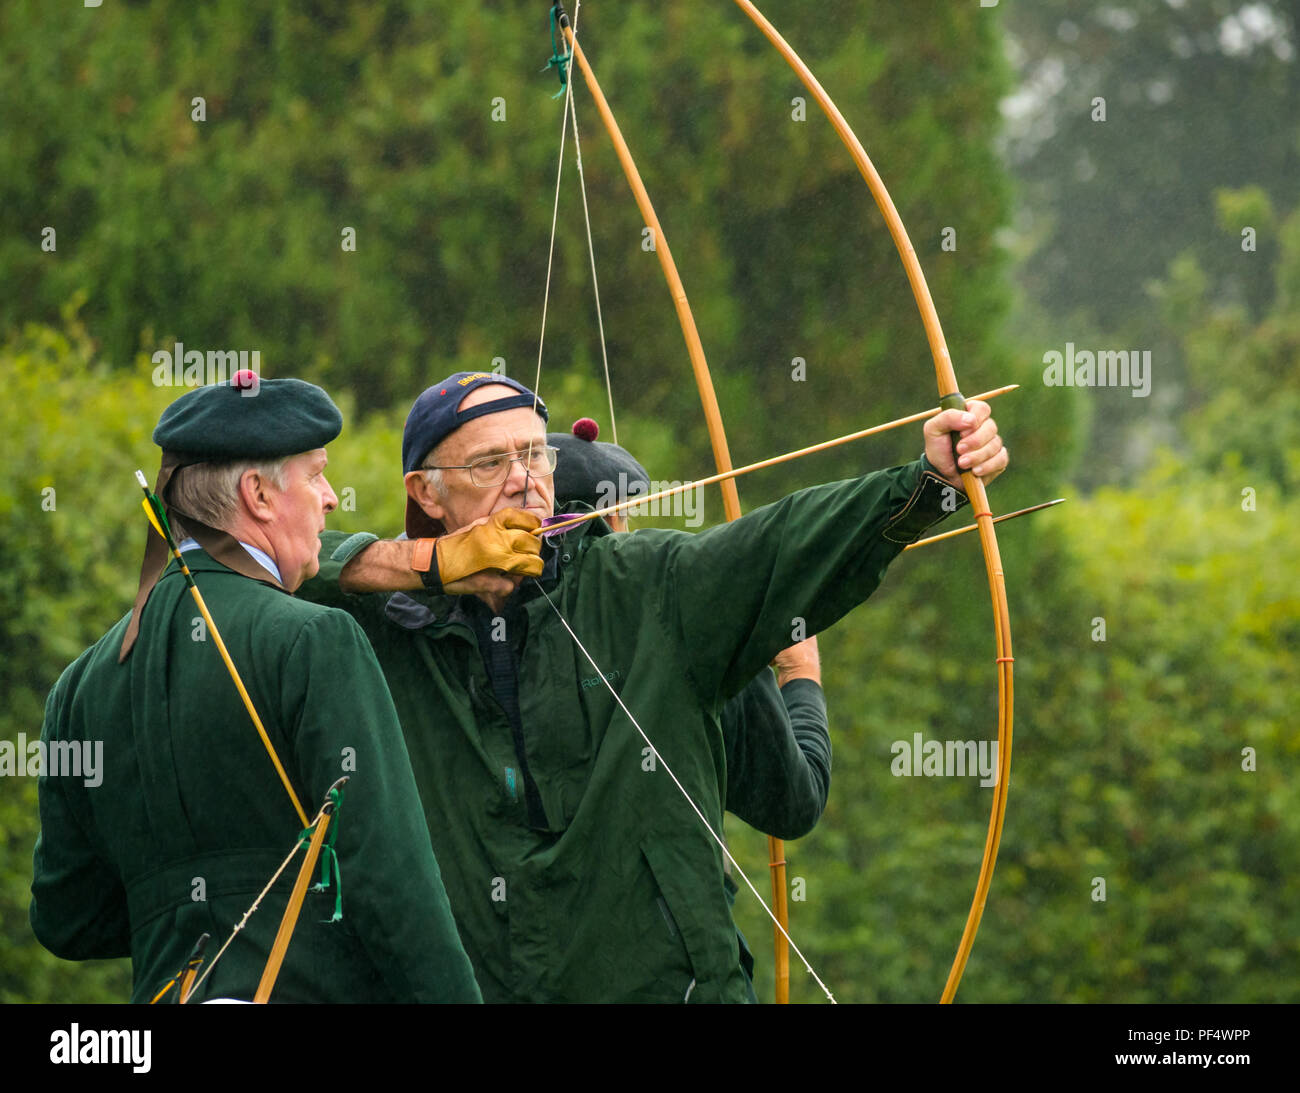 Royal Archery High Resolution Stock Photography And Images Alamy